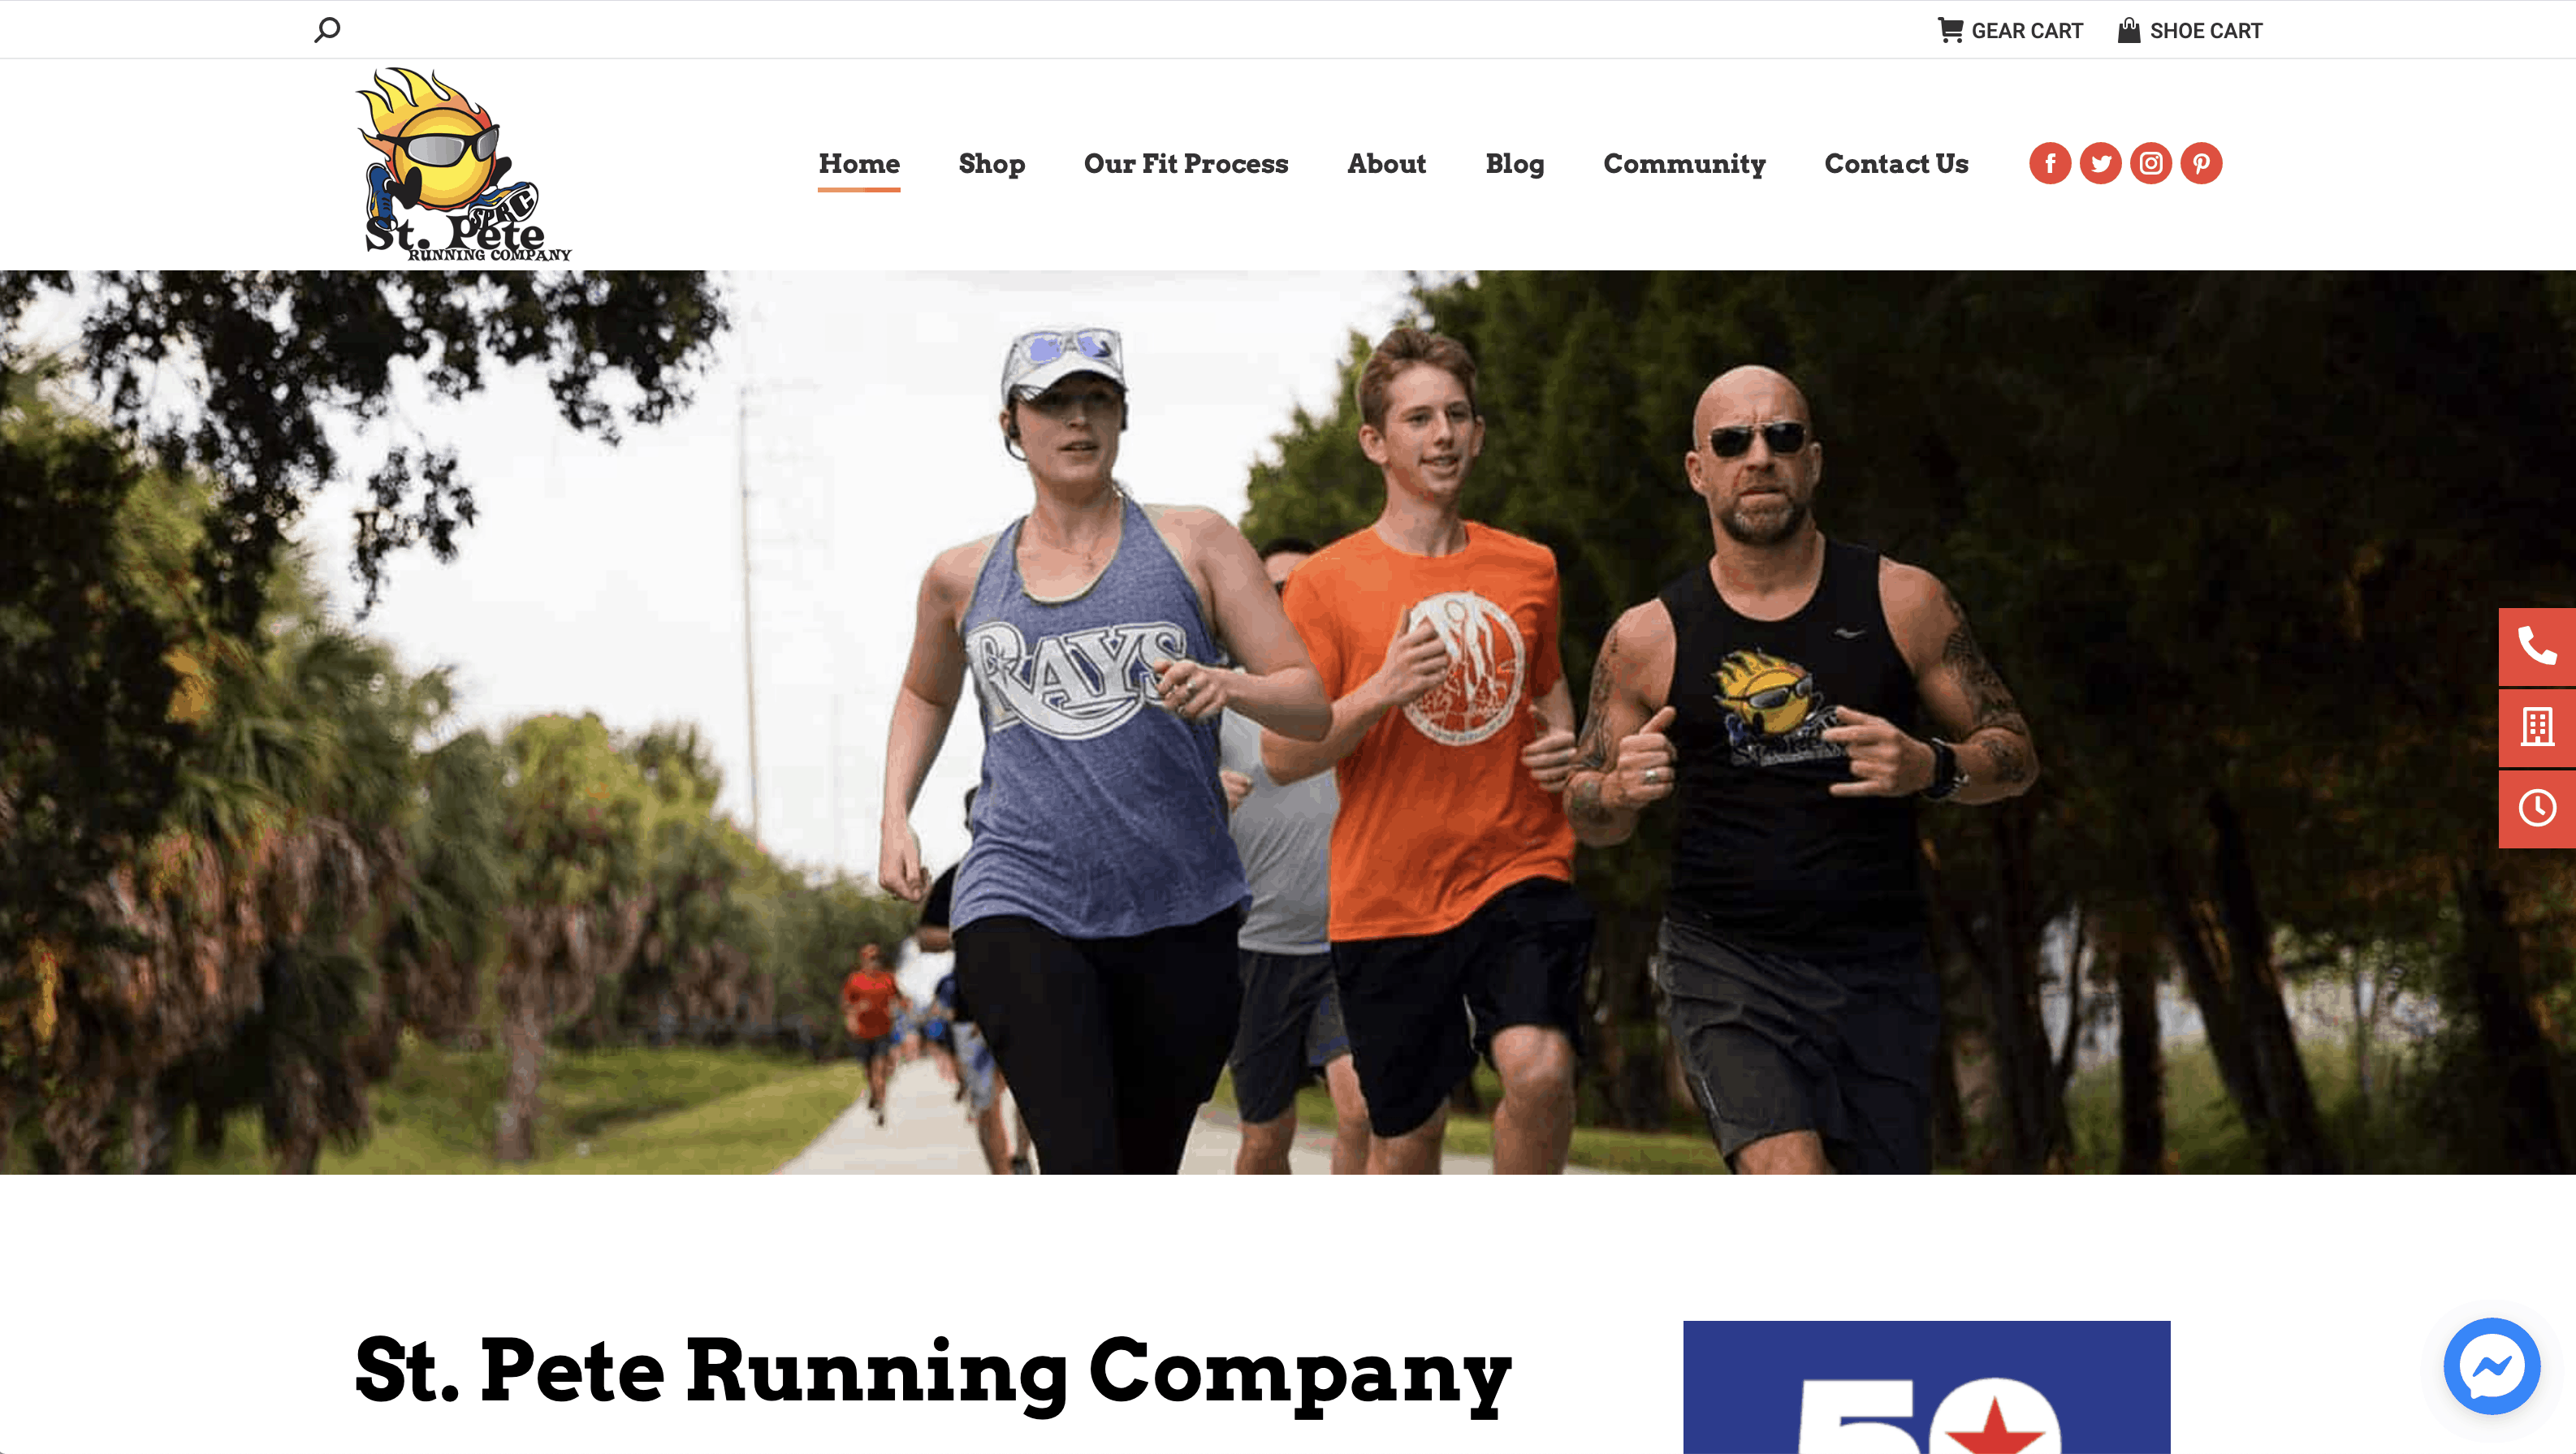 St. Pete running company website design services